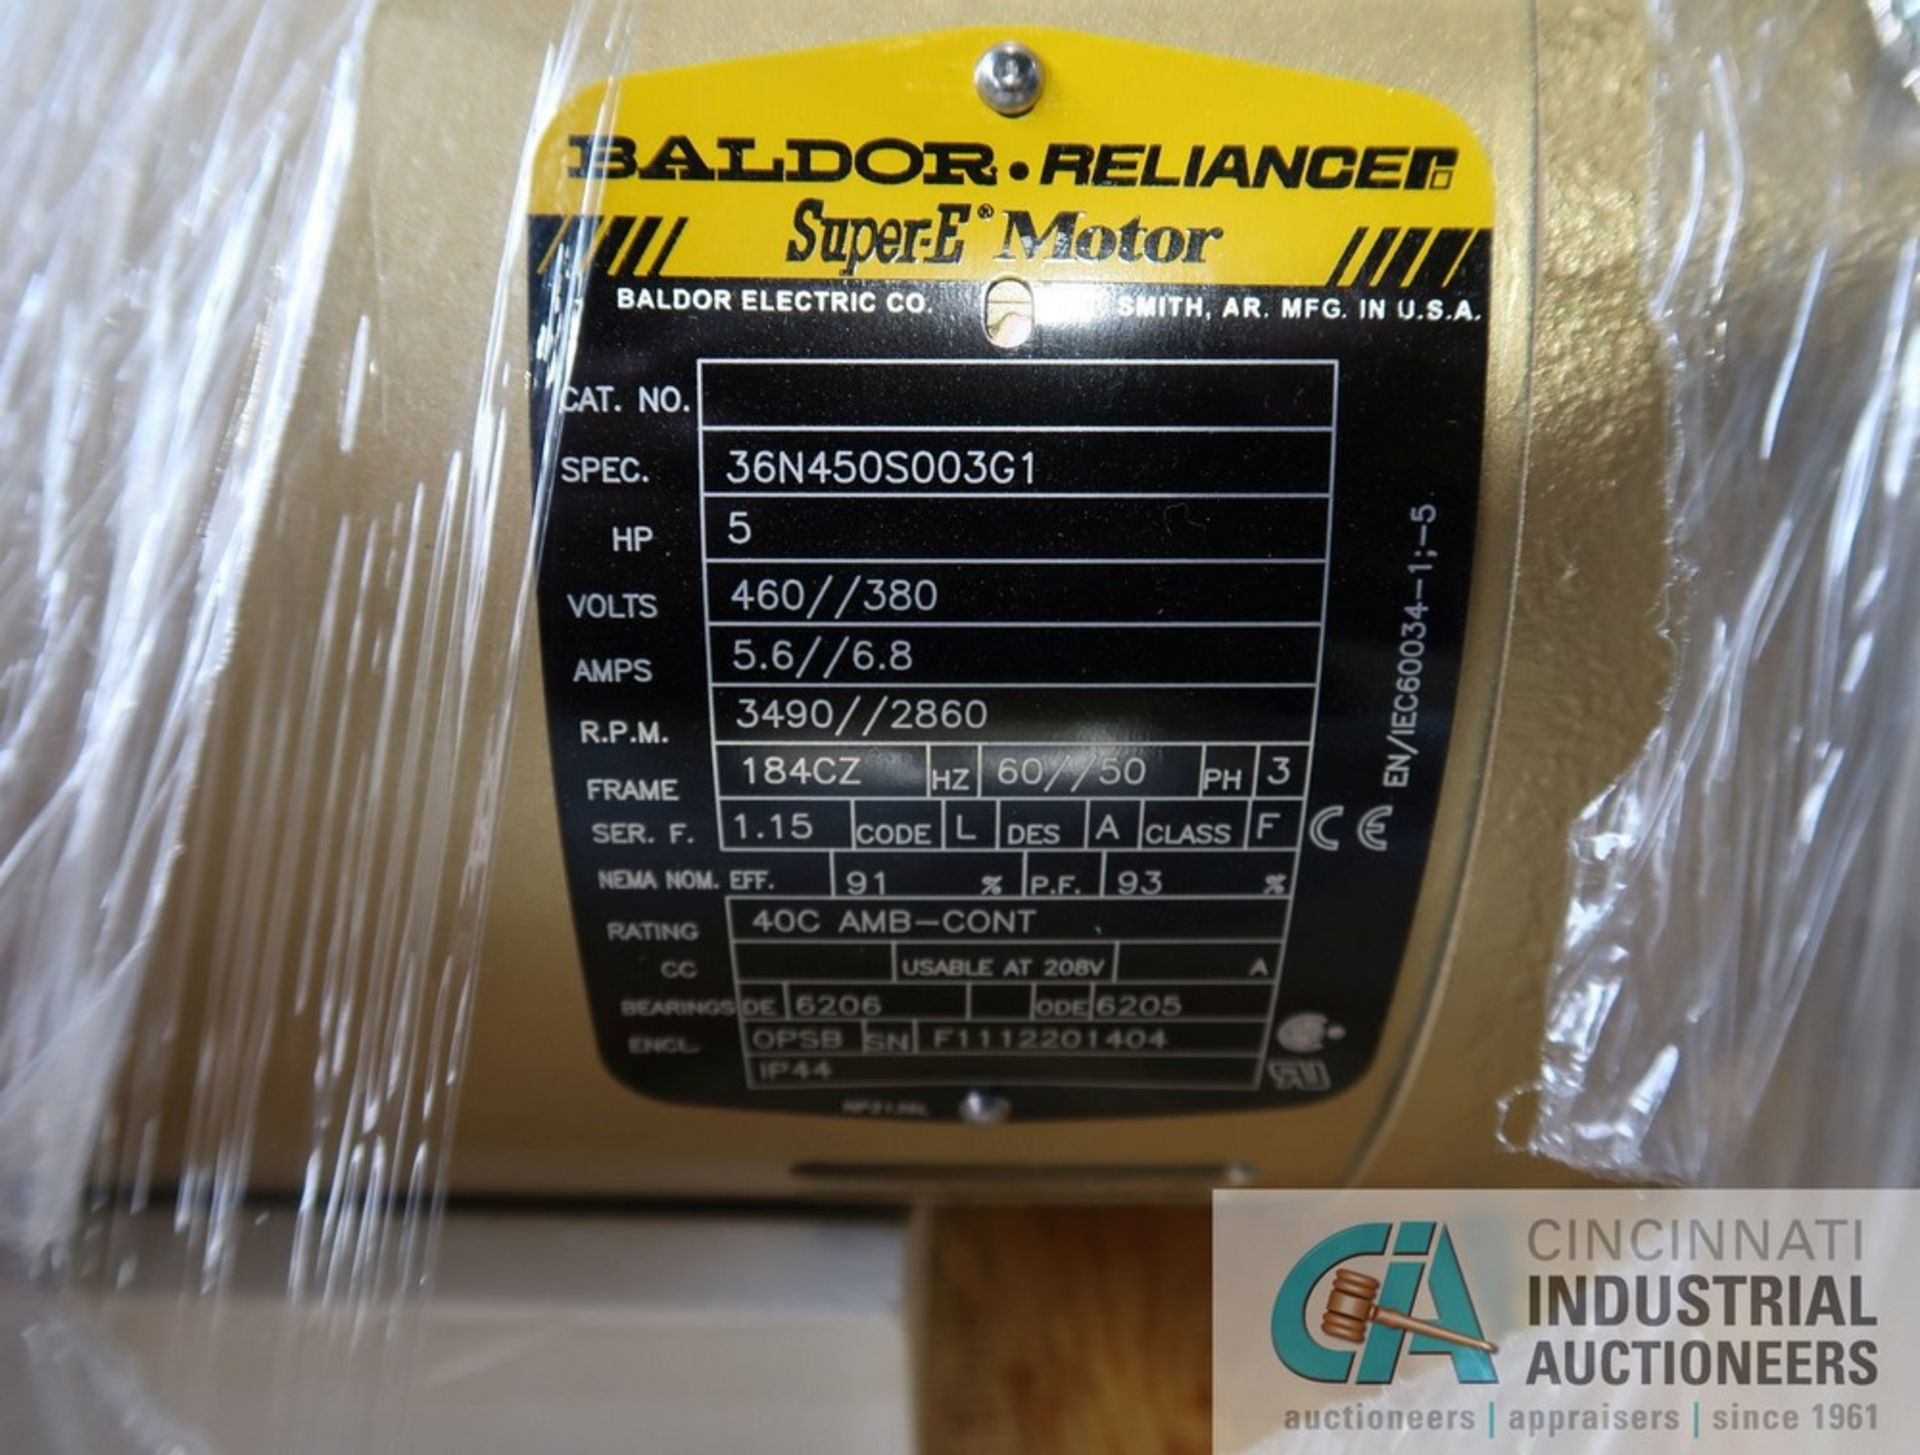 5 HP BALDOR - RELIANCE SUPER E MOTOR, 3-PHASE, 480/1,360 VOLTS - Image 2 of 2